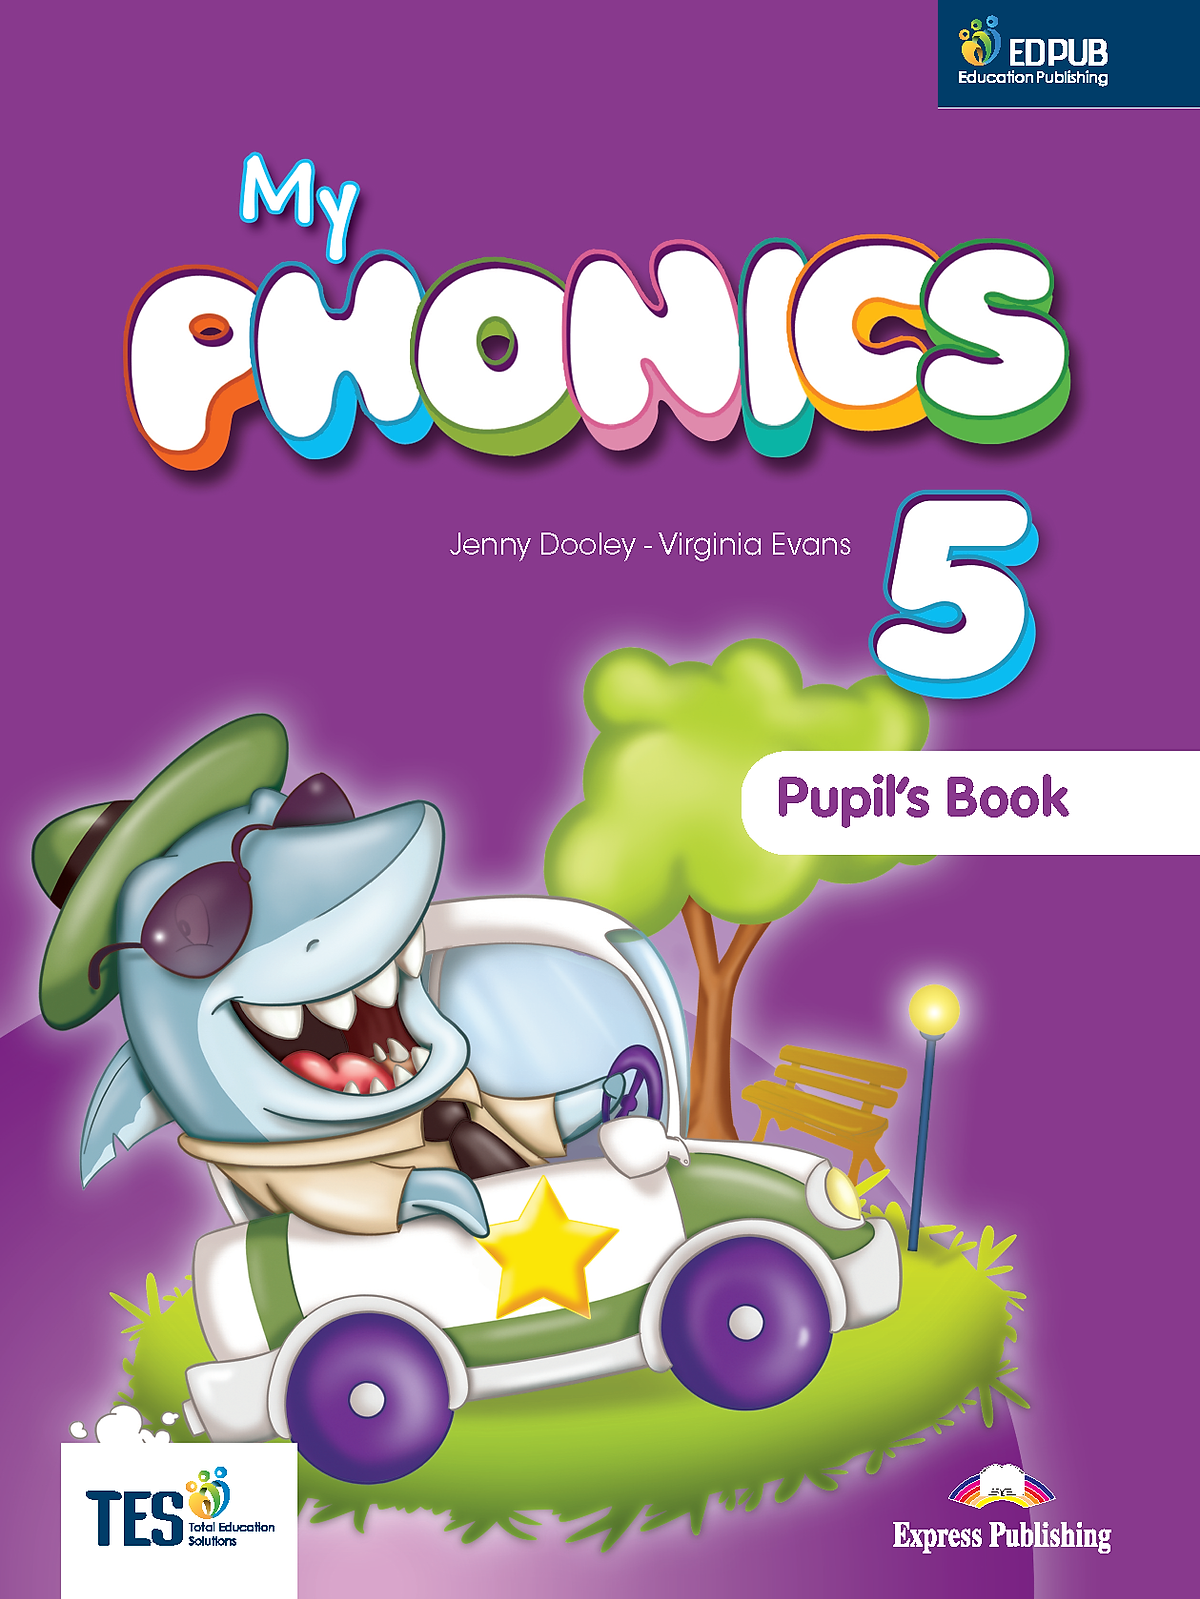 My Phonics 5 Pupil's Book (Int) With Crossplatform Application